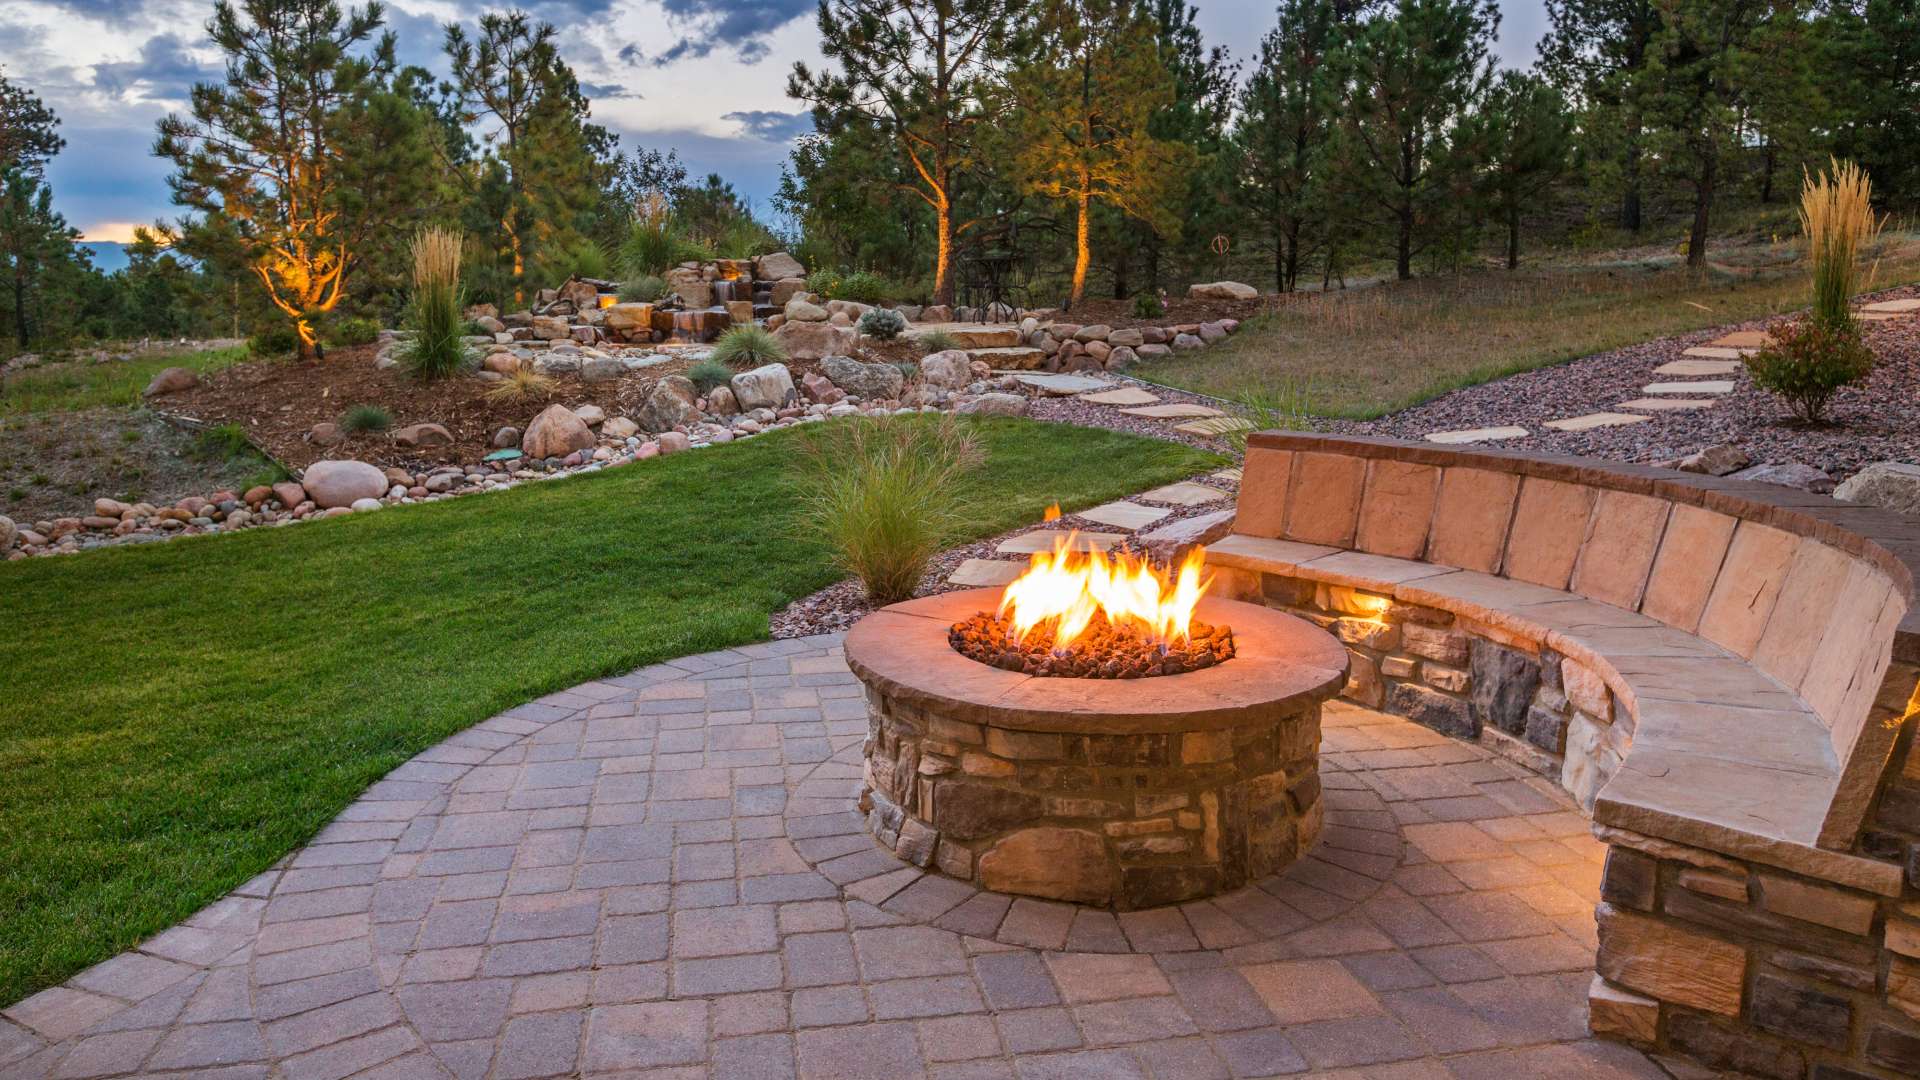 Fire Pit or Outdoor Fireplace - Which One Is Right for You?